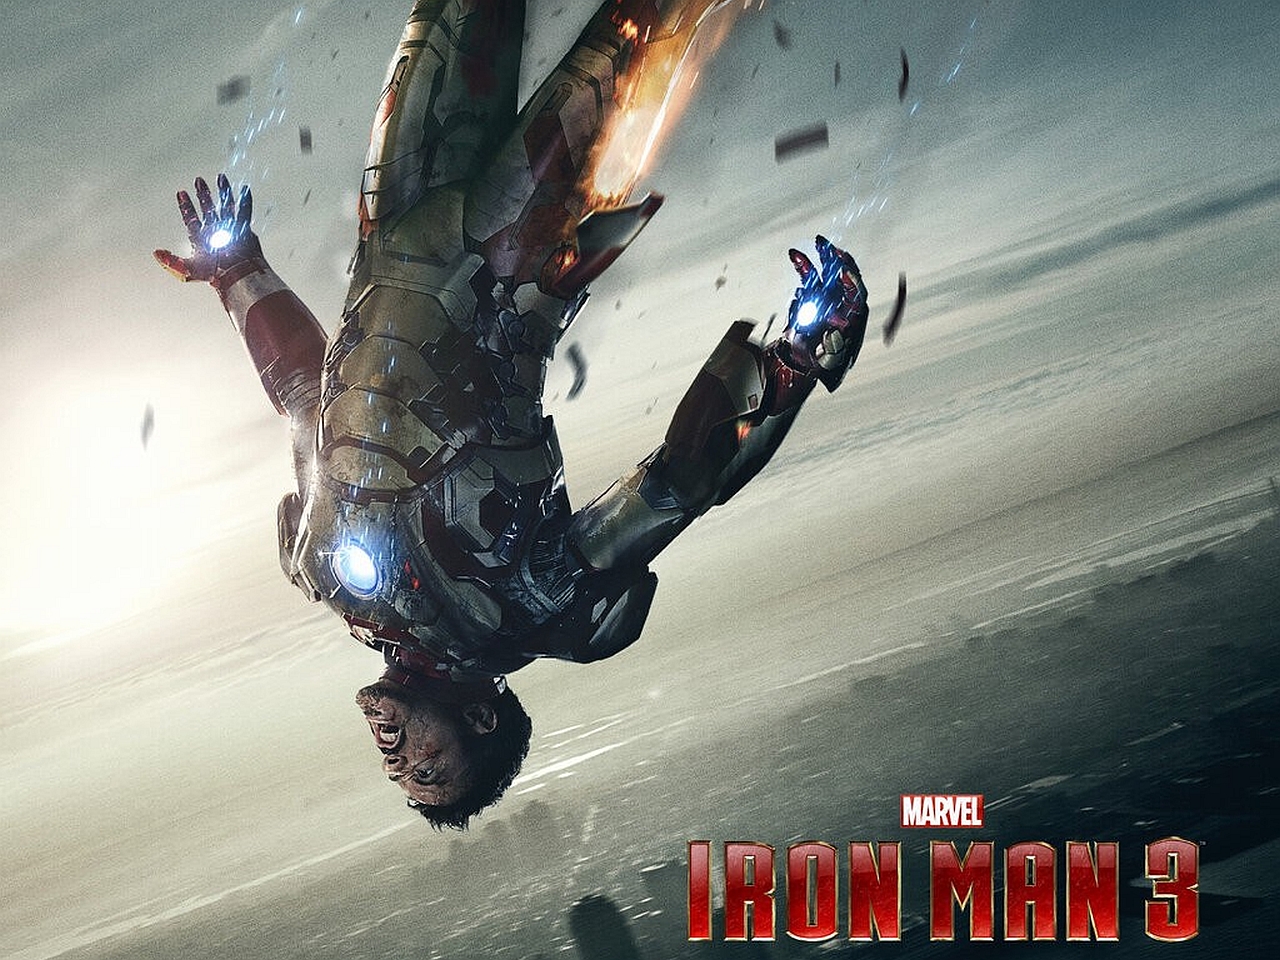  Iron Man 3 HQ Background Wallpapers